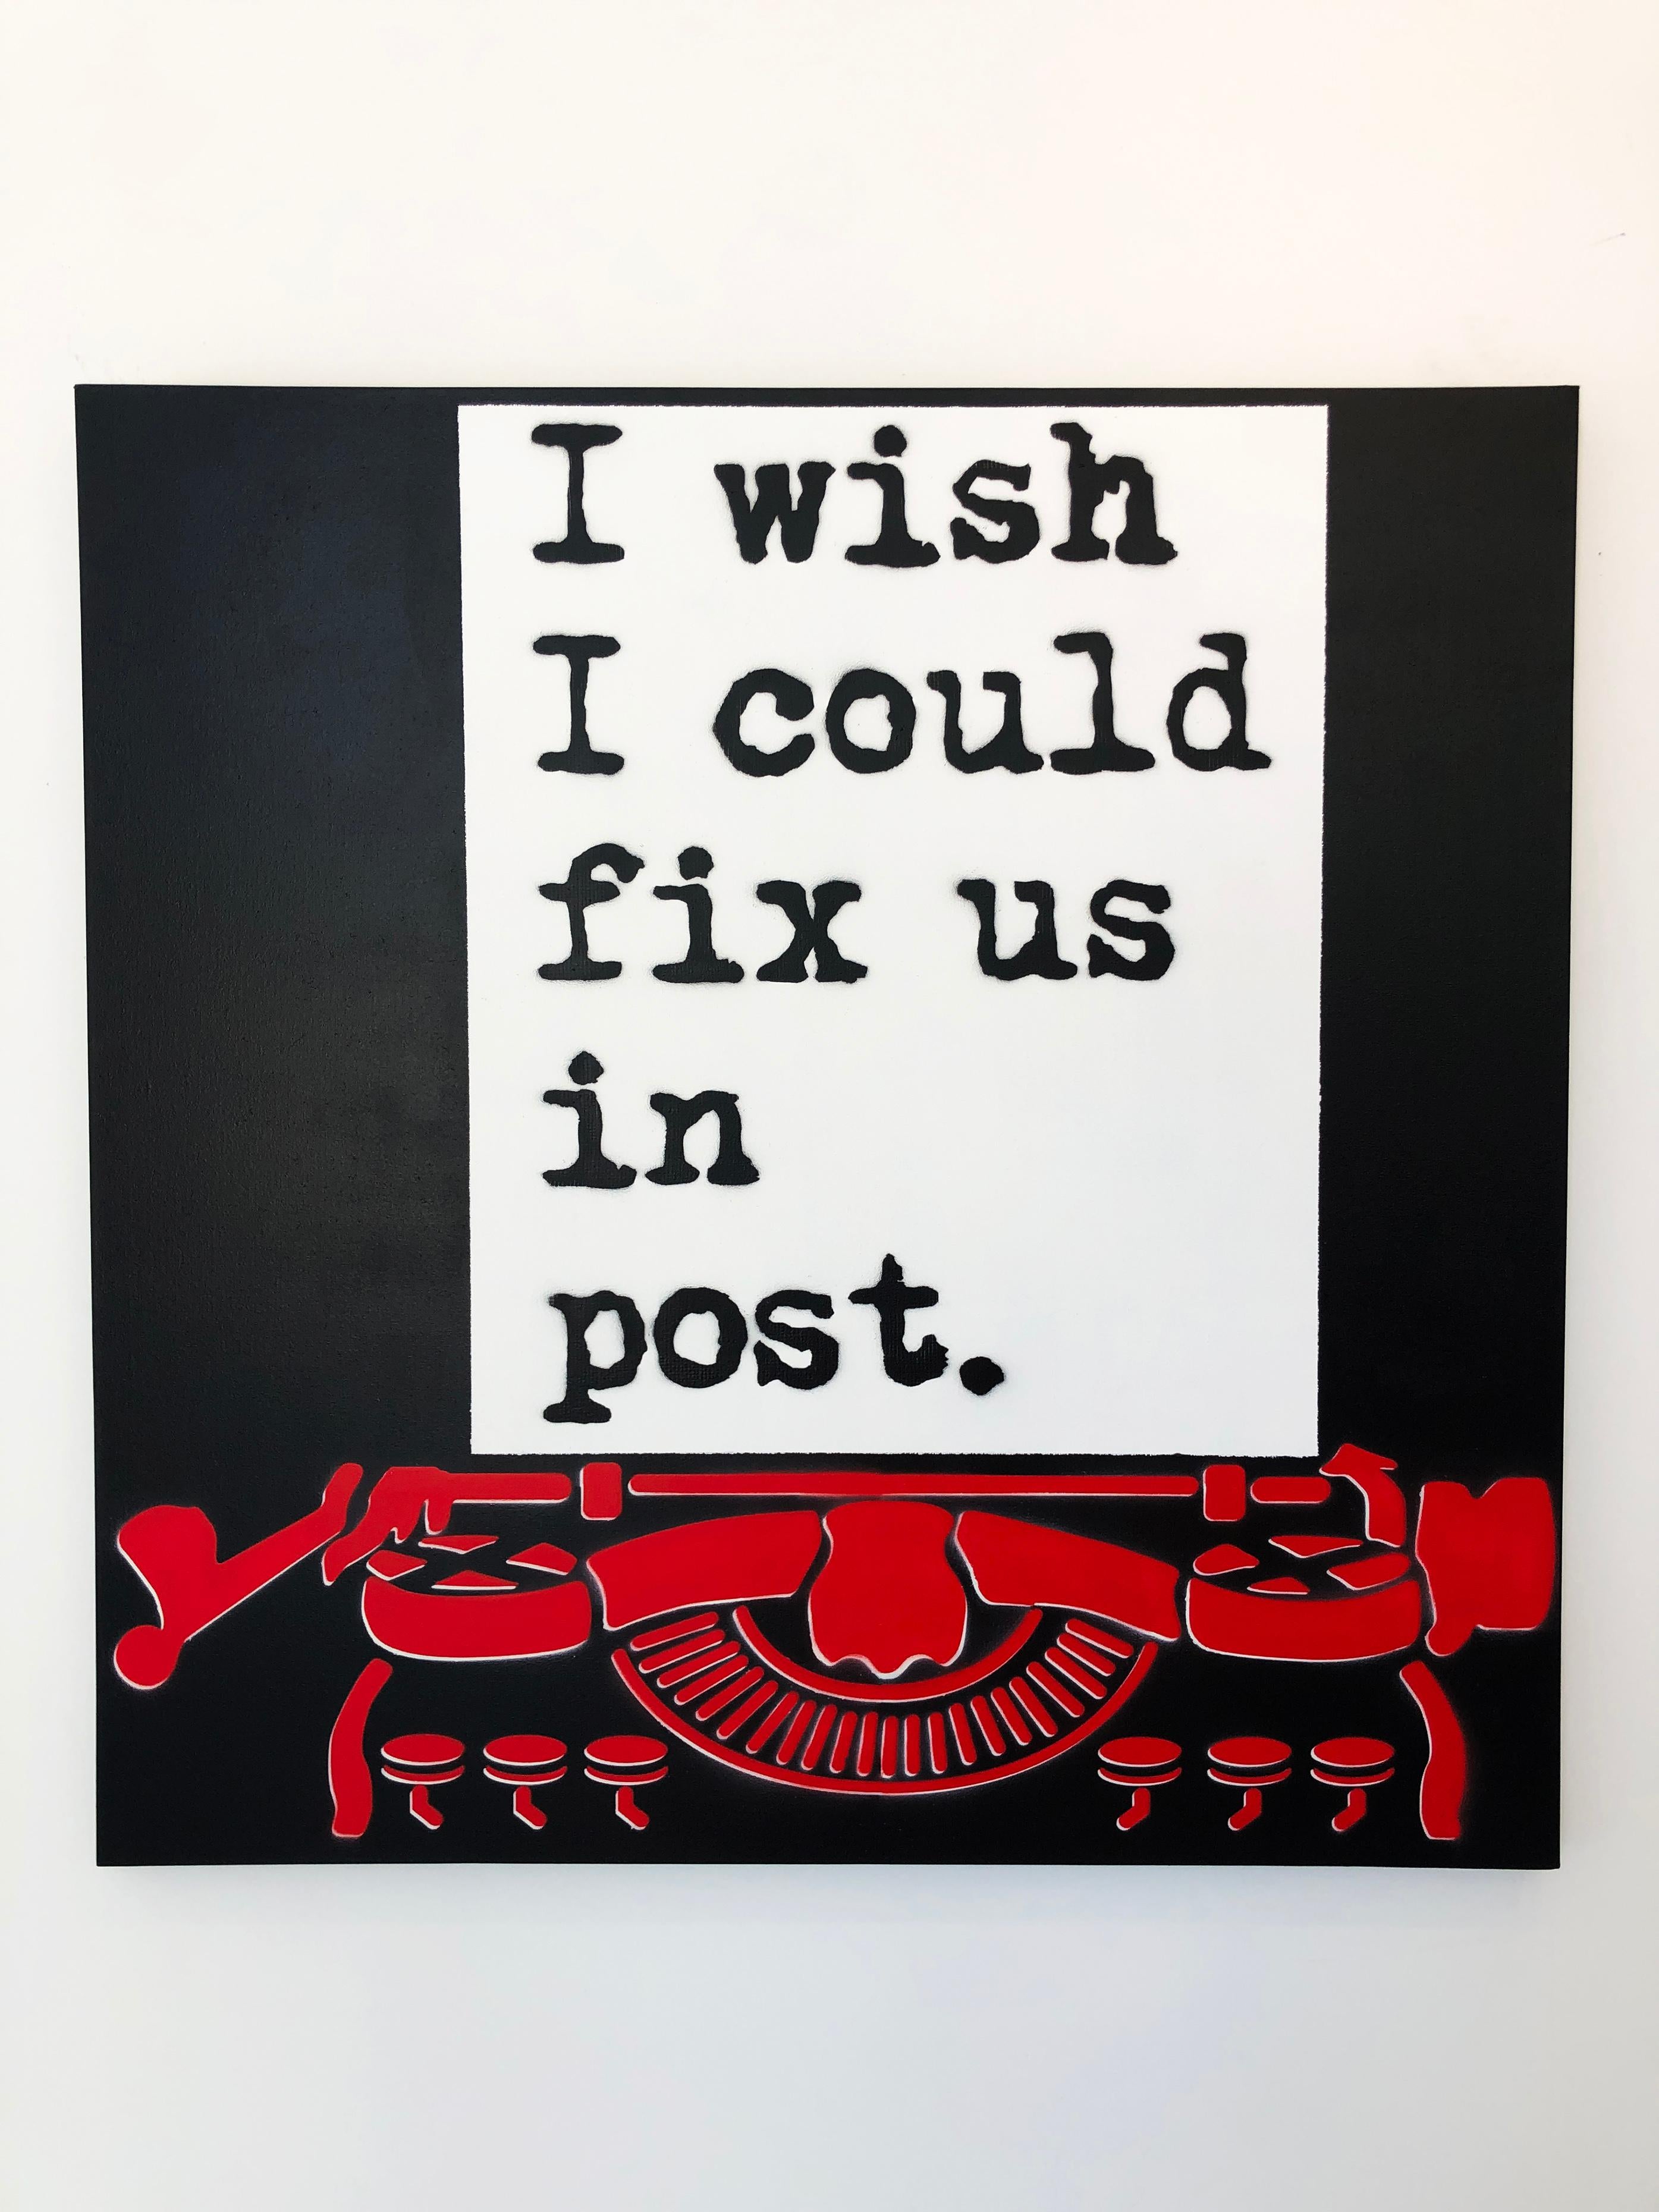  “Post”- acrylic spray paint stencil on canvas  - Painting by WRDSMTH